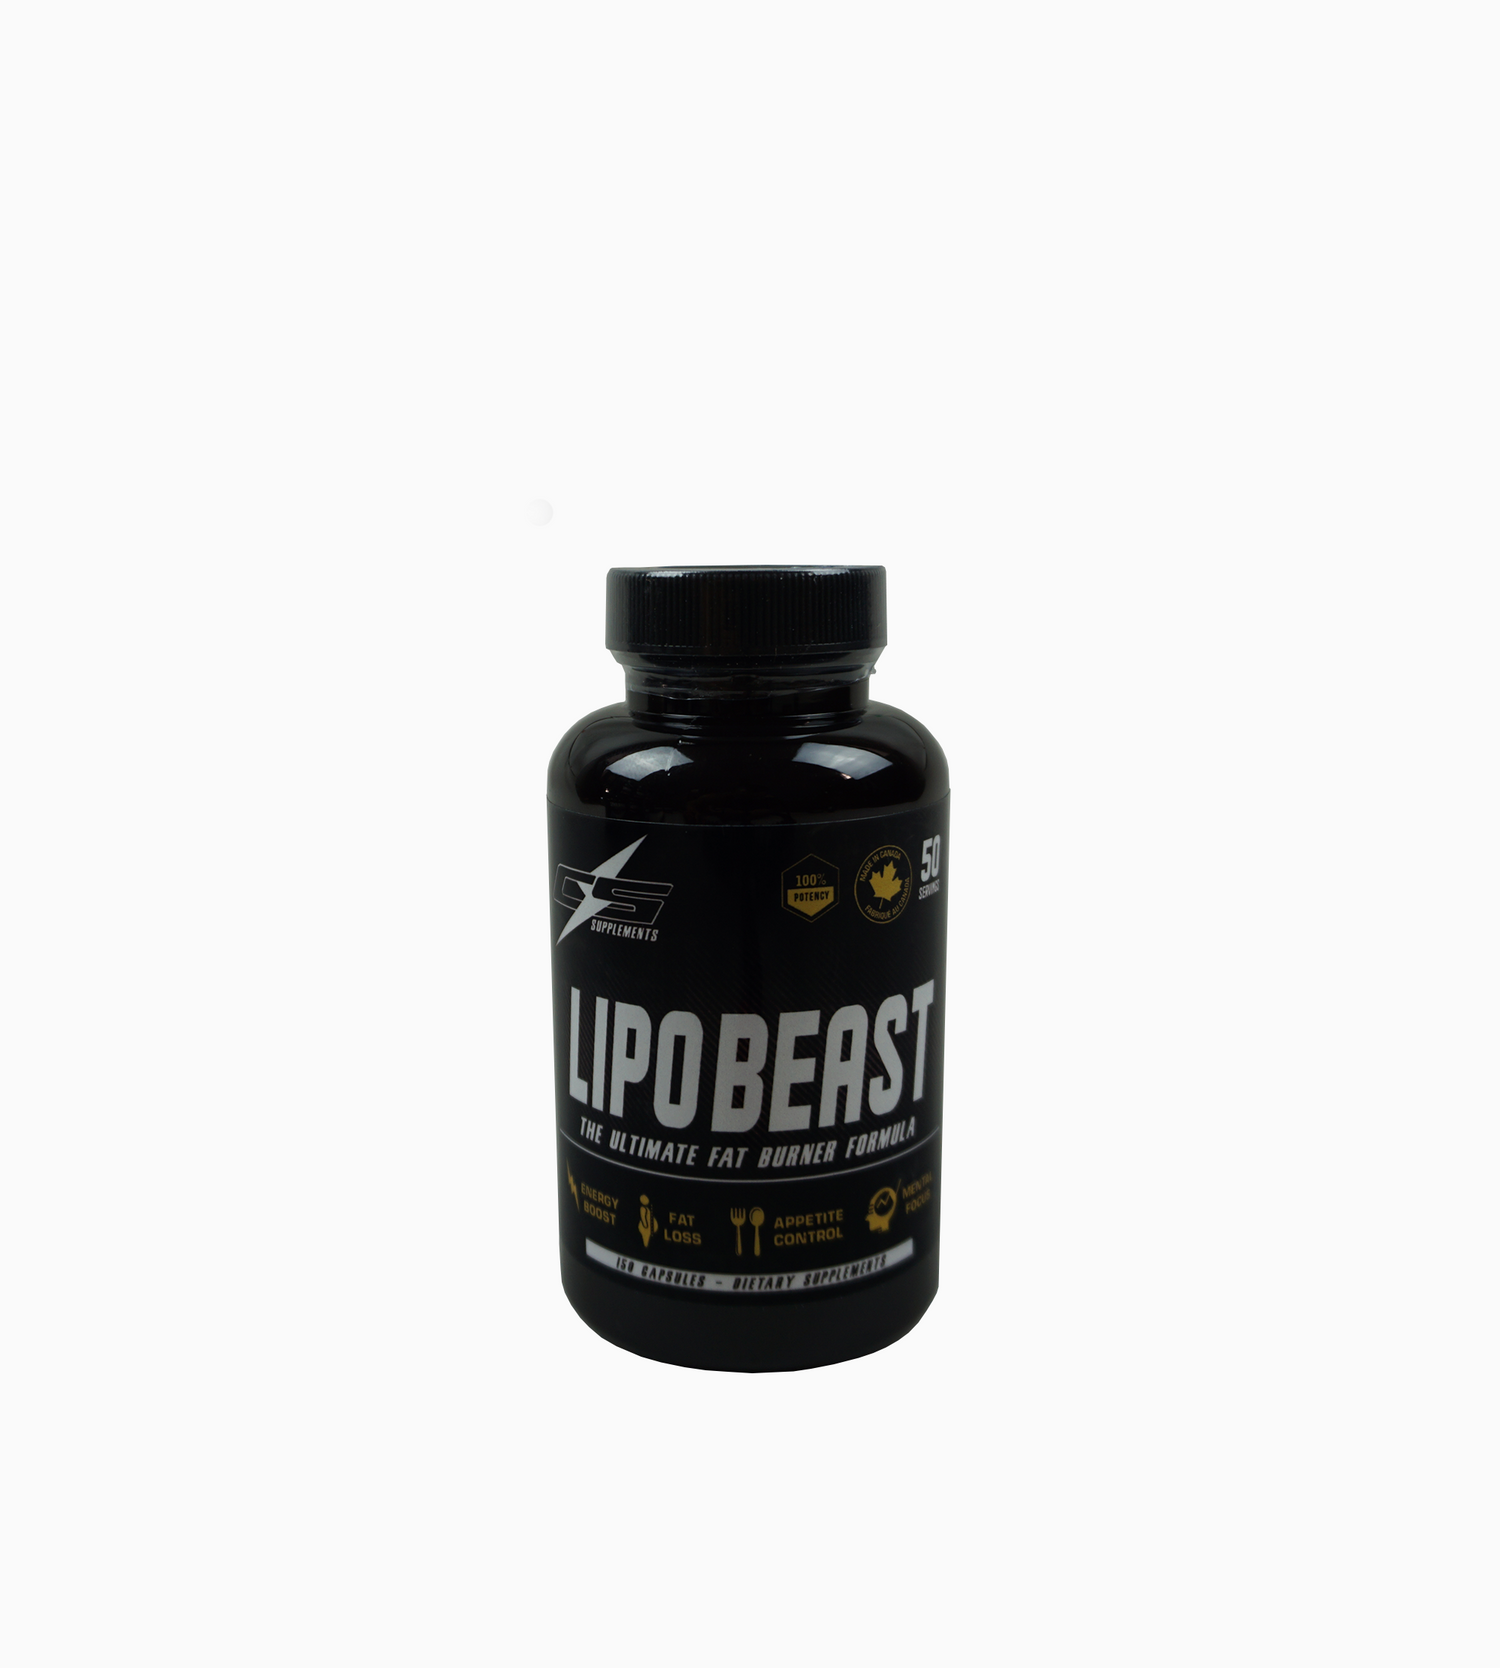 COMPETITOR SUPPLEMENTS - No proprietary blends!